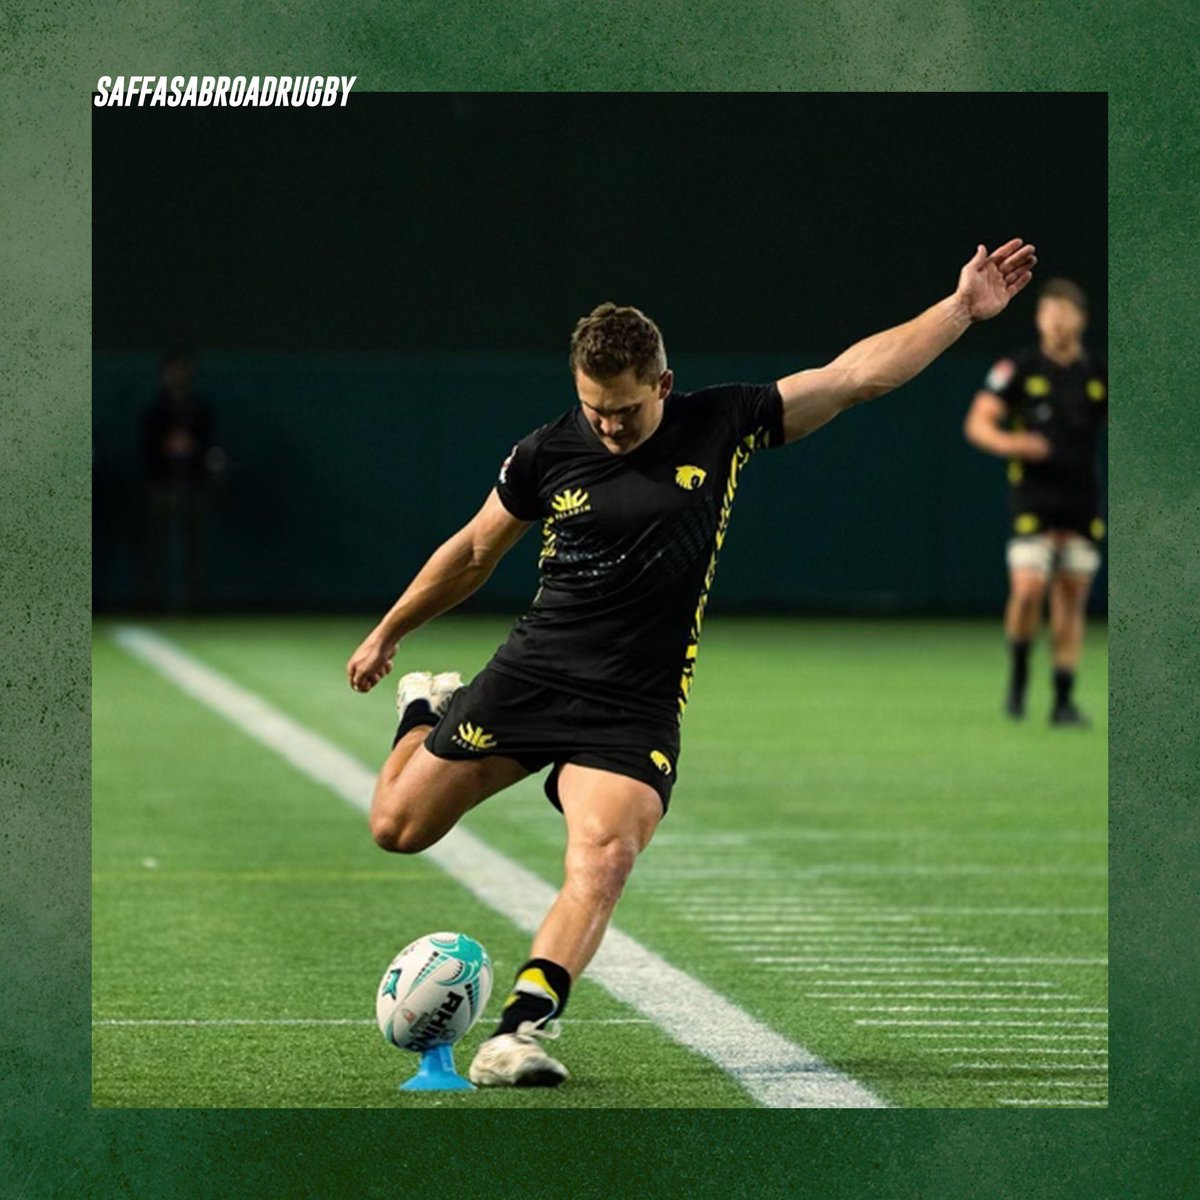 𝗣𝗢𝗜𝗡𝗧𝗦 𝗣𝗘𝗥𝗦𝗘𝗖𝗨𝗧𝗢𝗥 🥾 

Davy Coetzer of @Hou_Sabercats currently tops the @usmlr 𝘗𝘖𝘐𝘕𝘛𝘚 𝘛𝘈𝘉𝘓𝘌 with 115 points to date. 📊 @JamDelay 

#SaffasAbroad